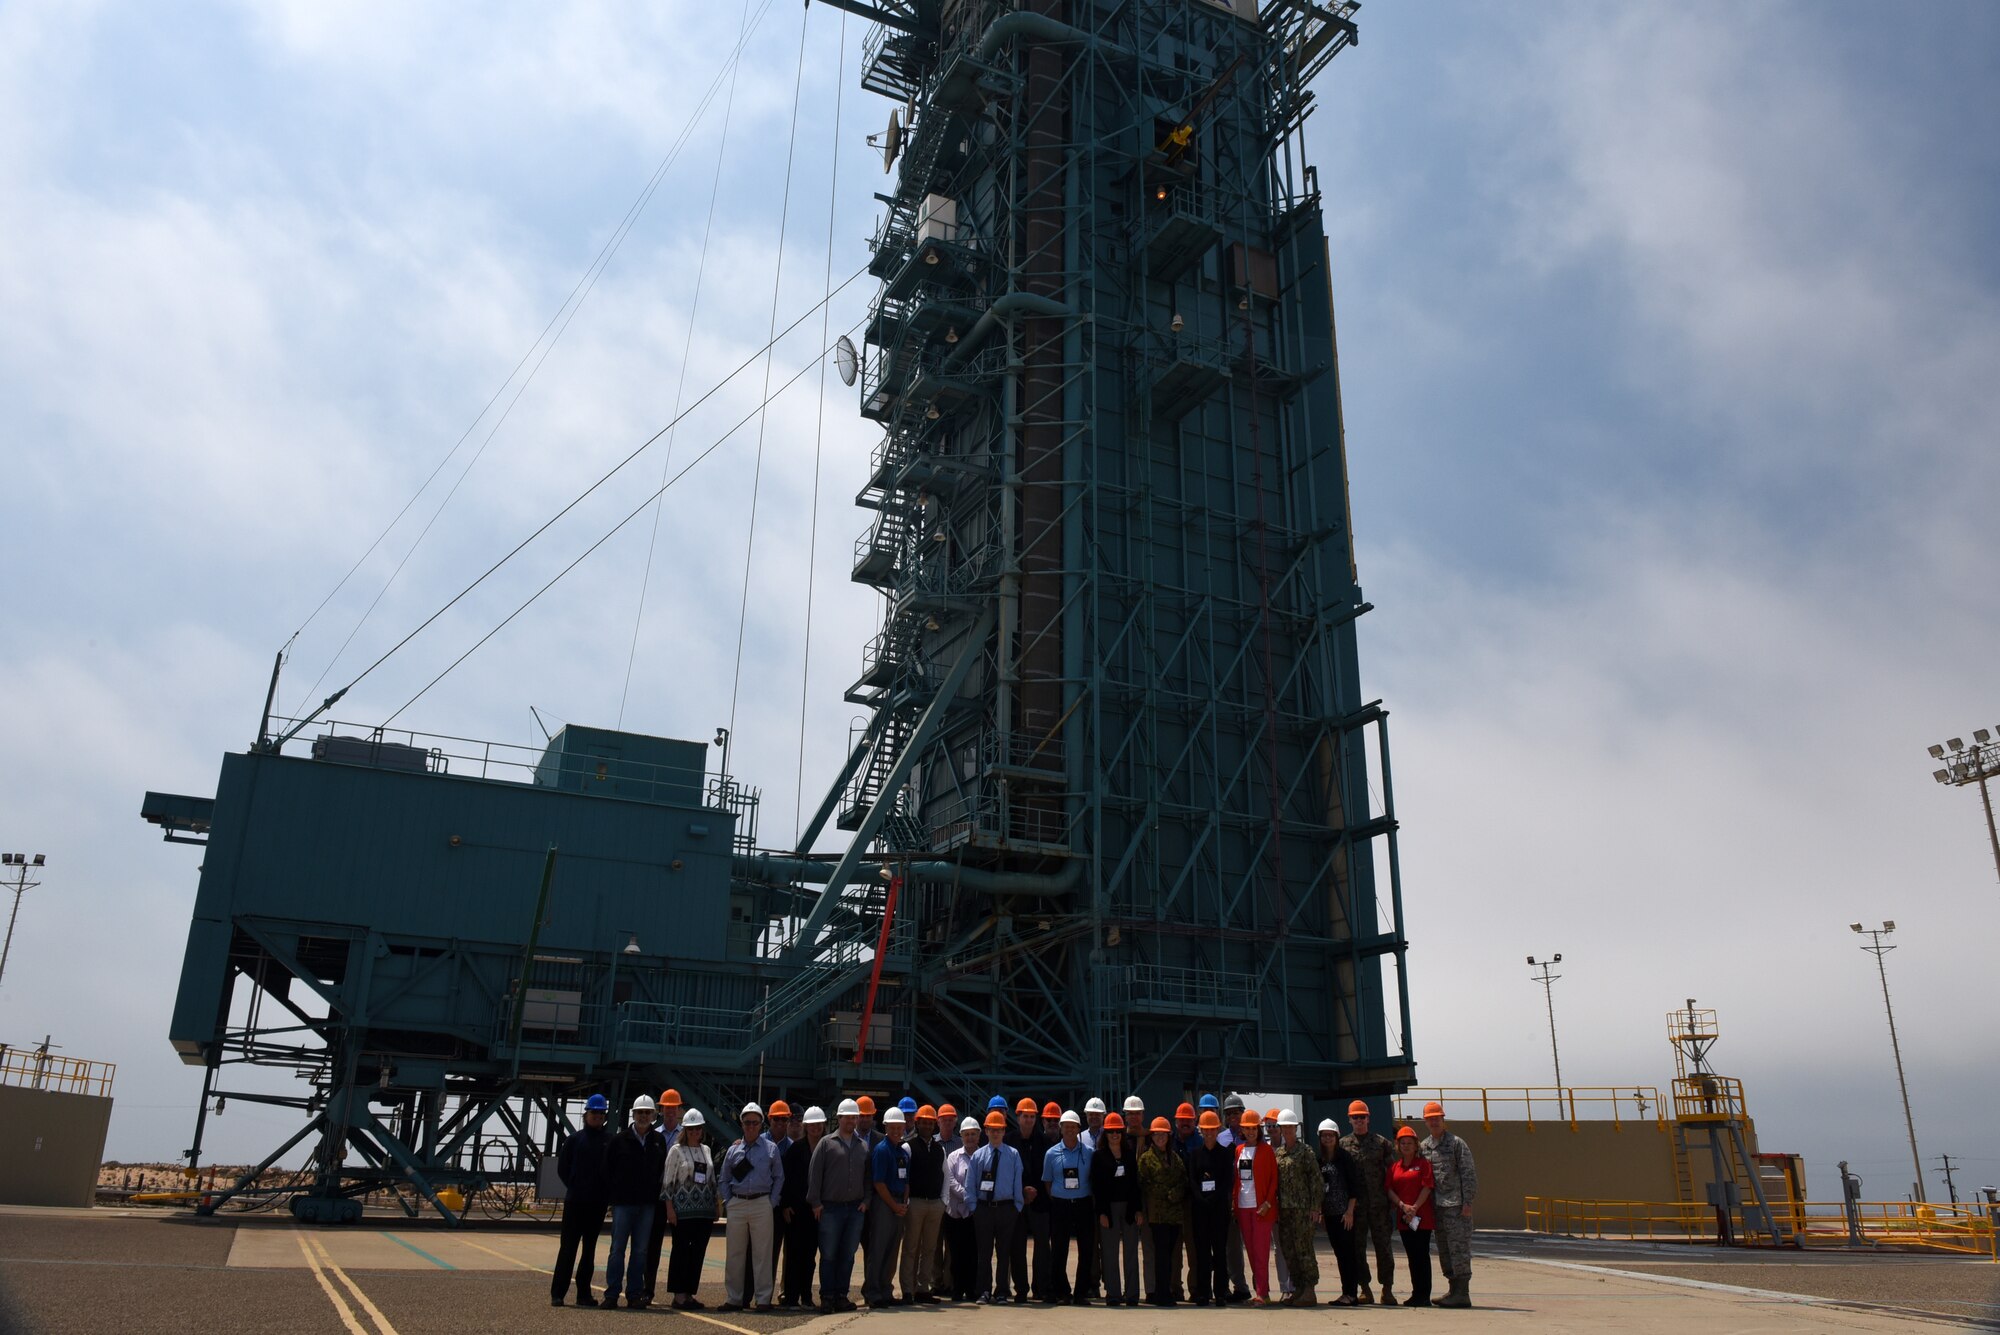 Gen. Terrence J. O’Shaughnessy, commander of U.S. Northern Command and North American Aerospace Defense Command, and NORAD civic leaders take a group photo at Space Launch Complex-2 during a tour on Vandenberg Air Force Base, Calif., Aug. 7, 2018. (U.S. Air Force photo by Tech. Sgt. Jim Araos/Released)